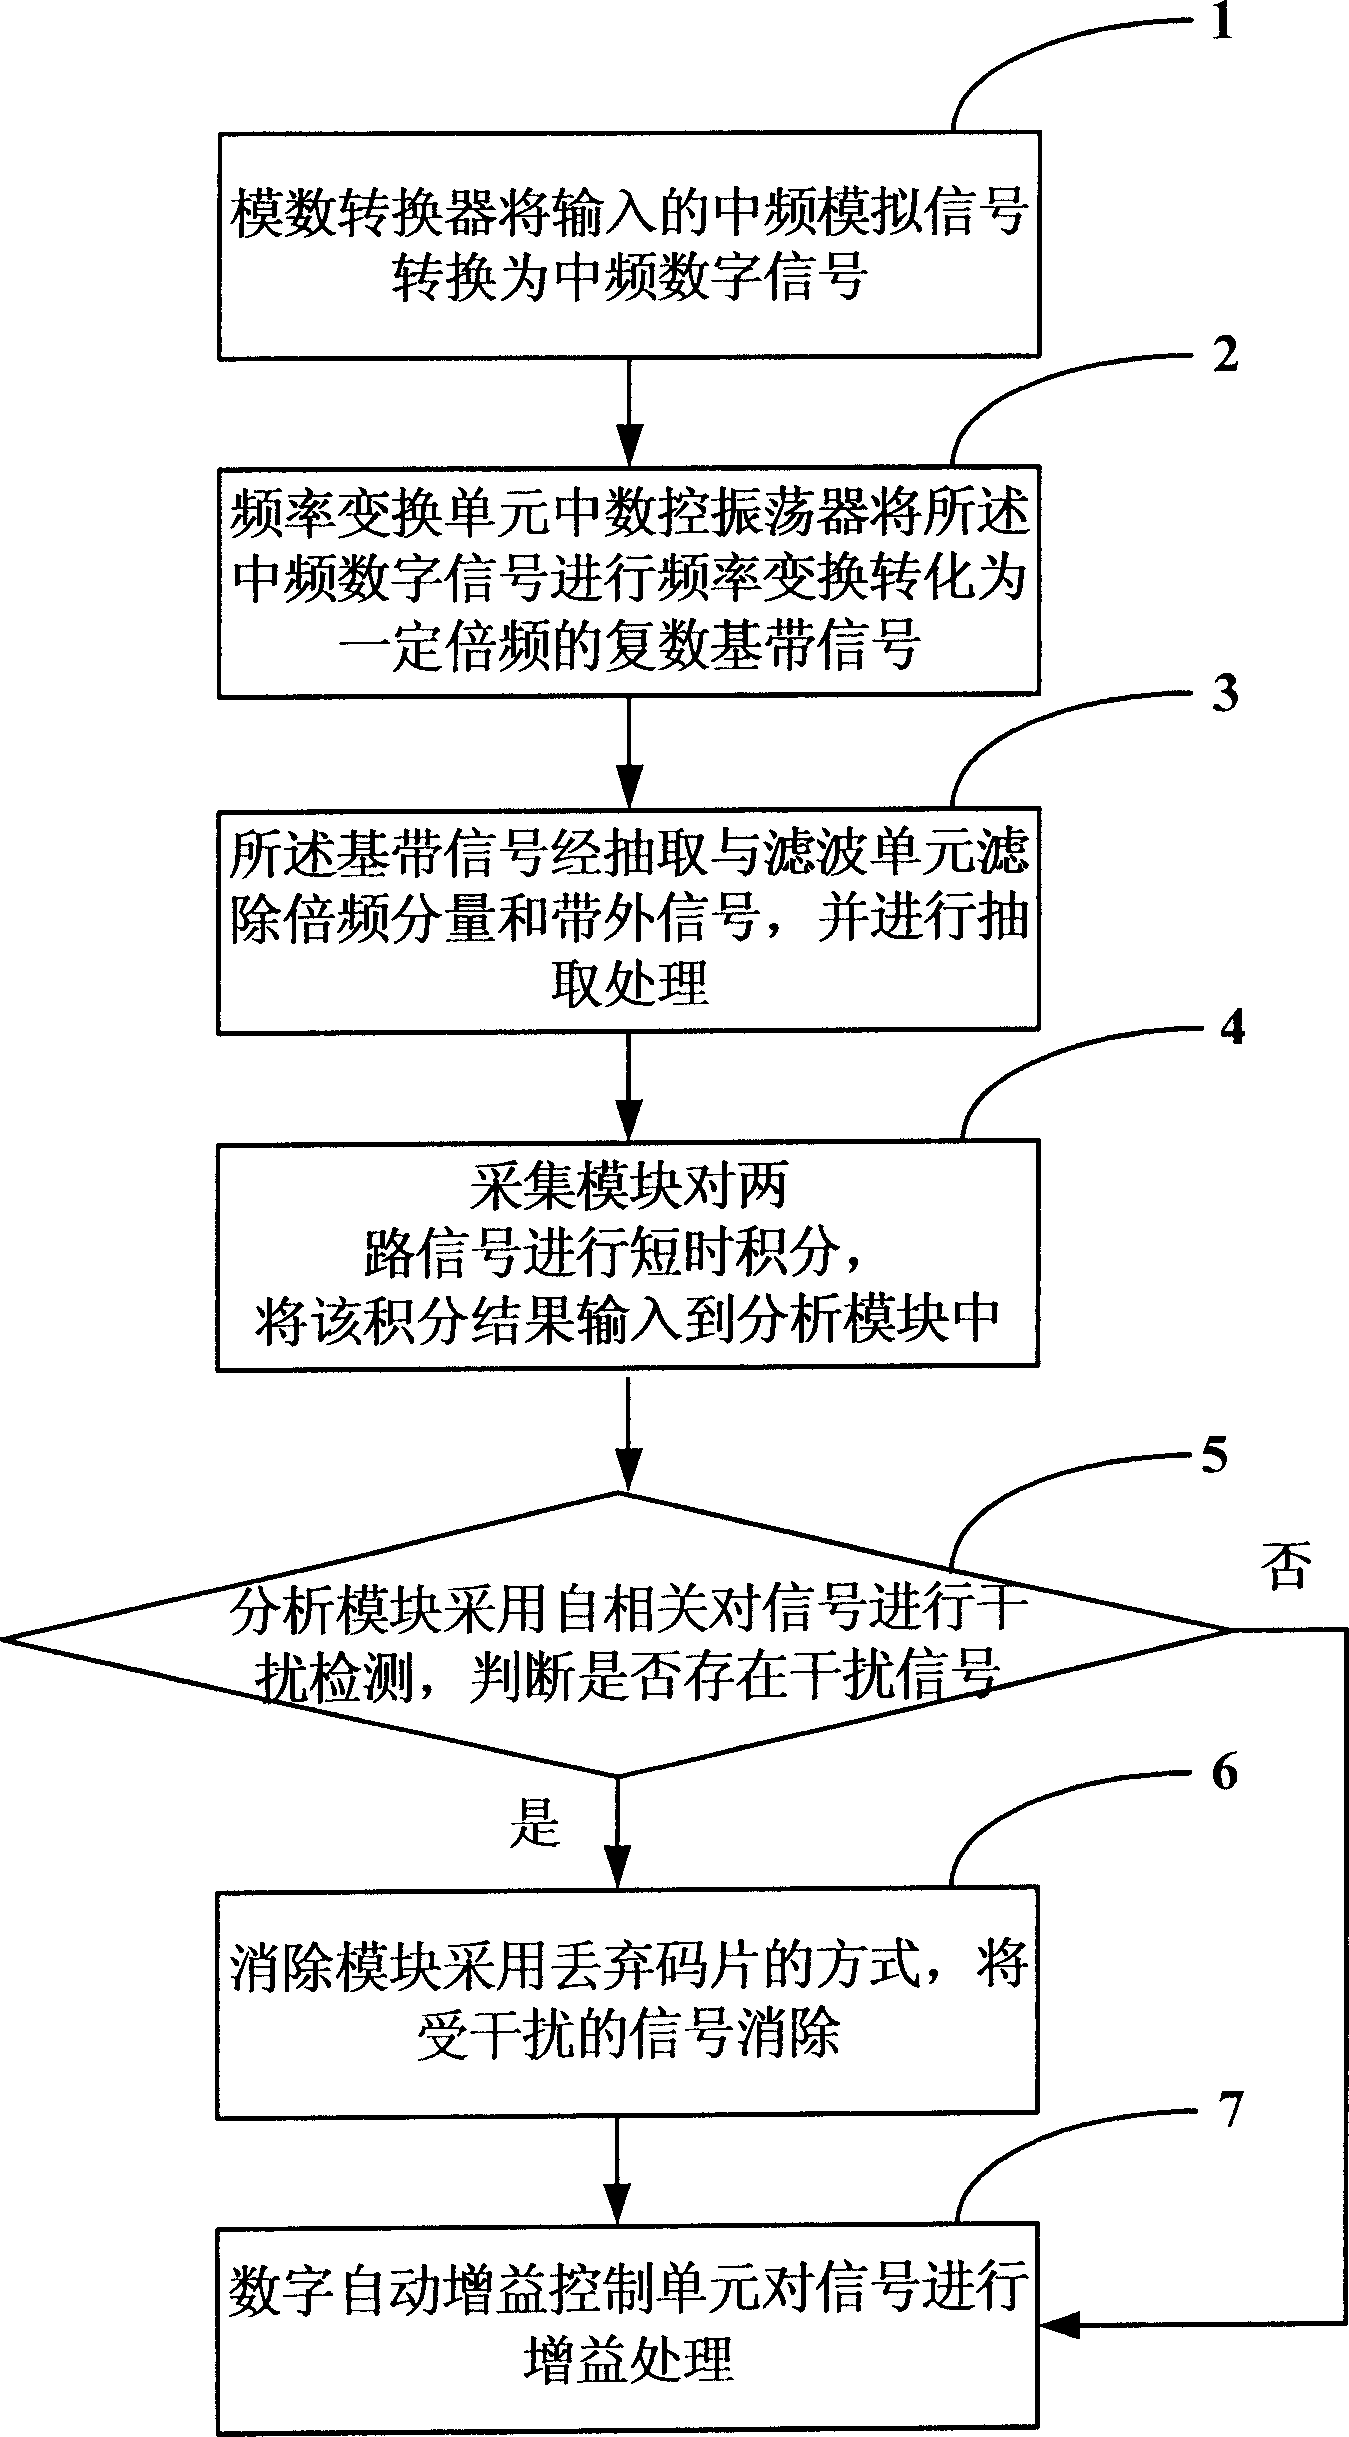 Interference detecting processing system and method